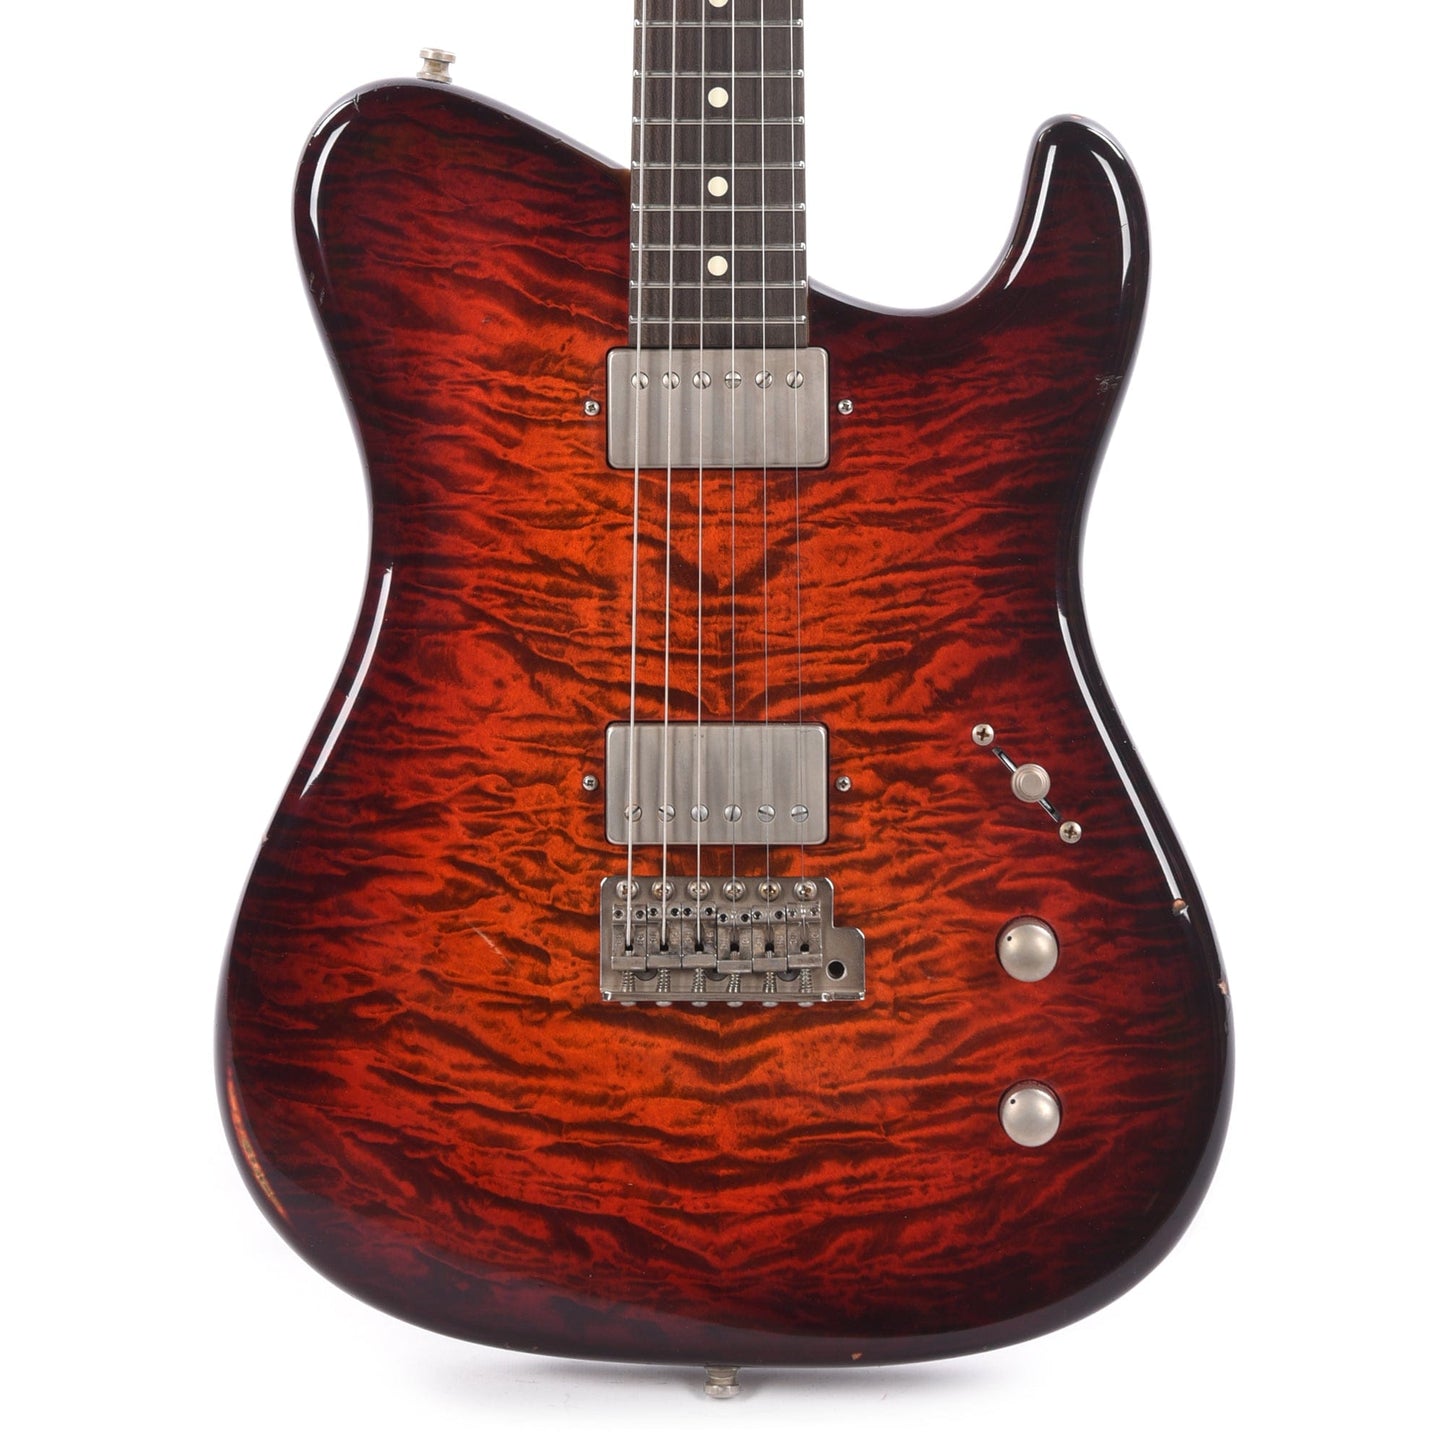 Tausch 665 RAW Deluxe Trem HH Figured Maple Aged Red Sunset Burst w/Flame Maple Neck Electric Guitars / Solid Body